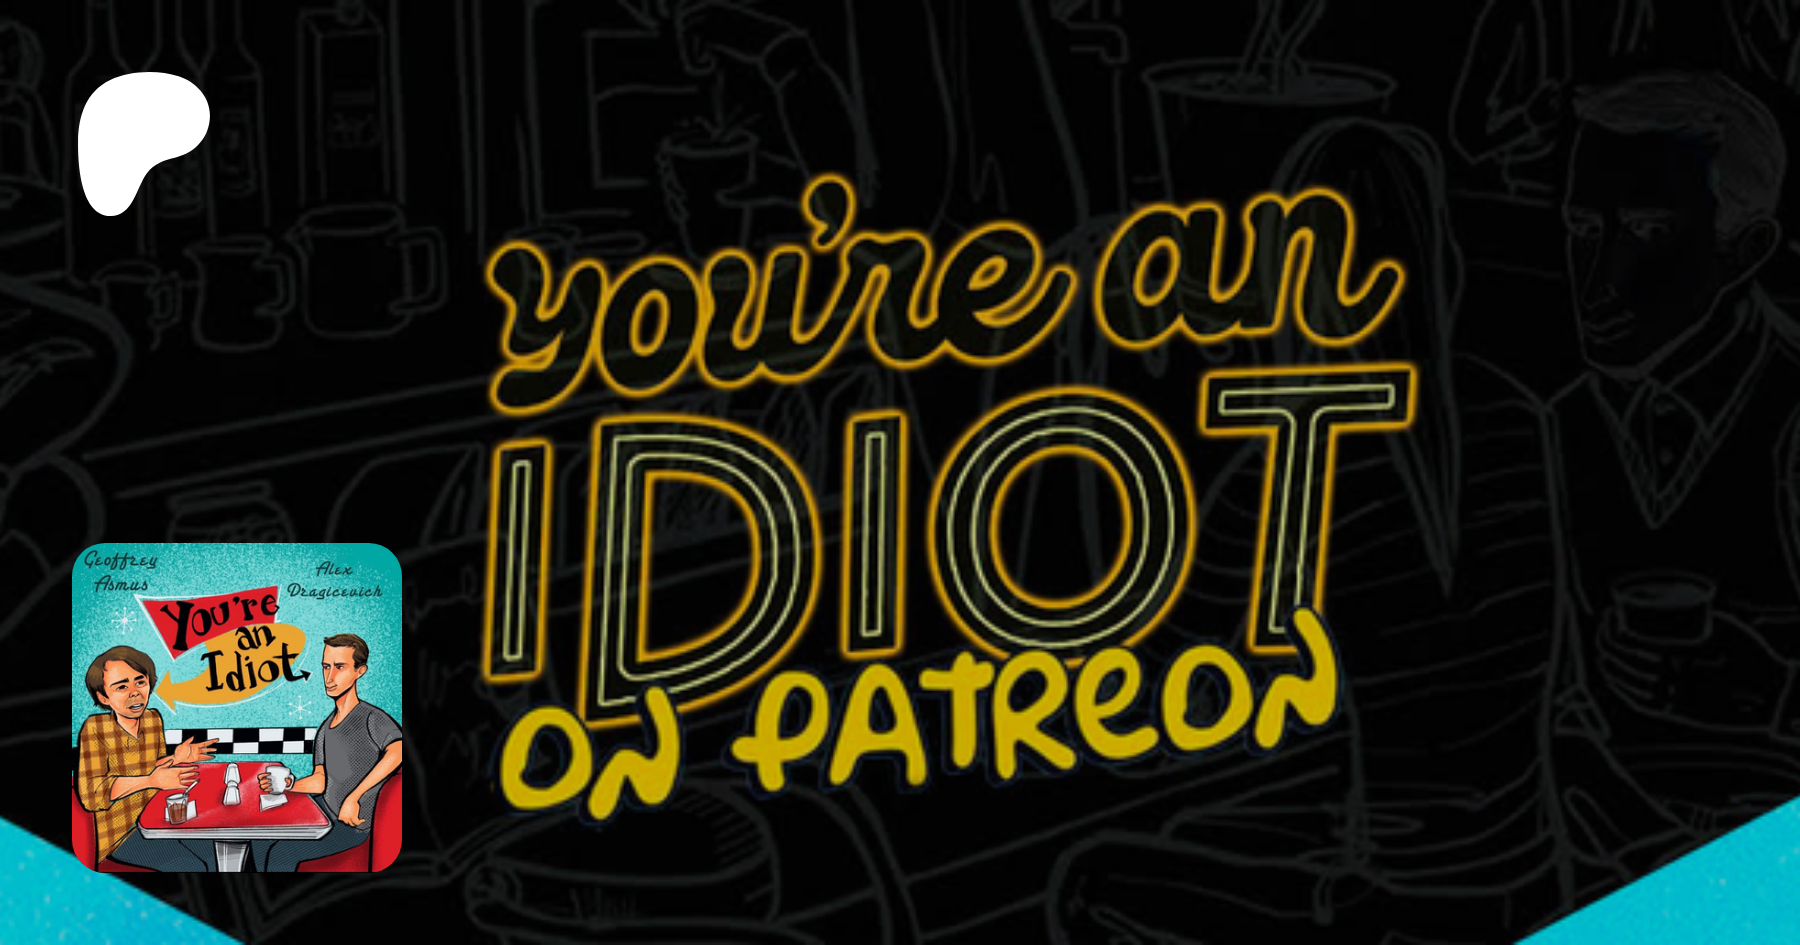 You're An Idiot Podcast 